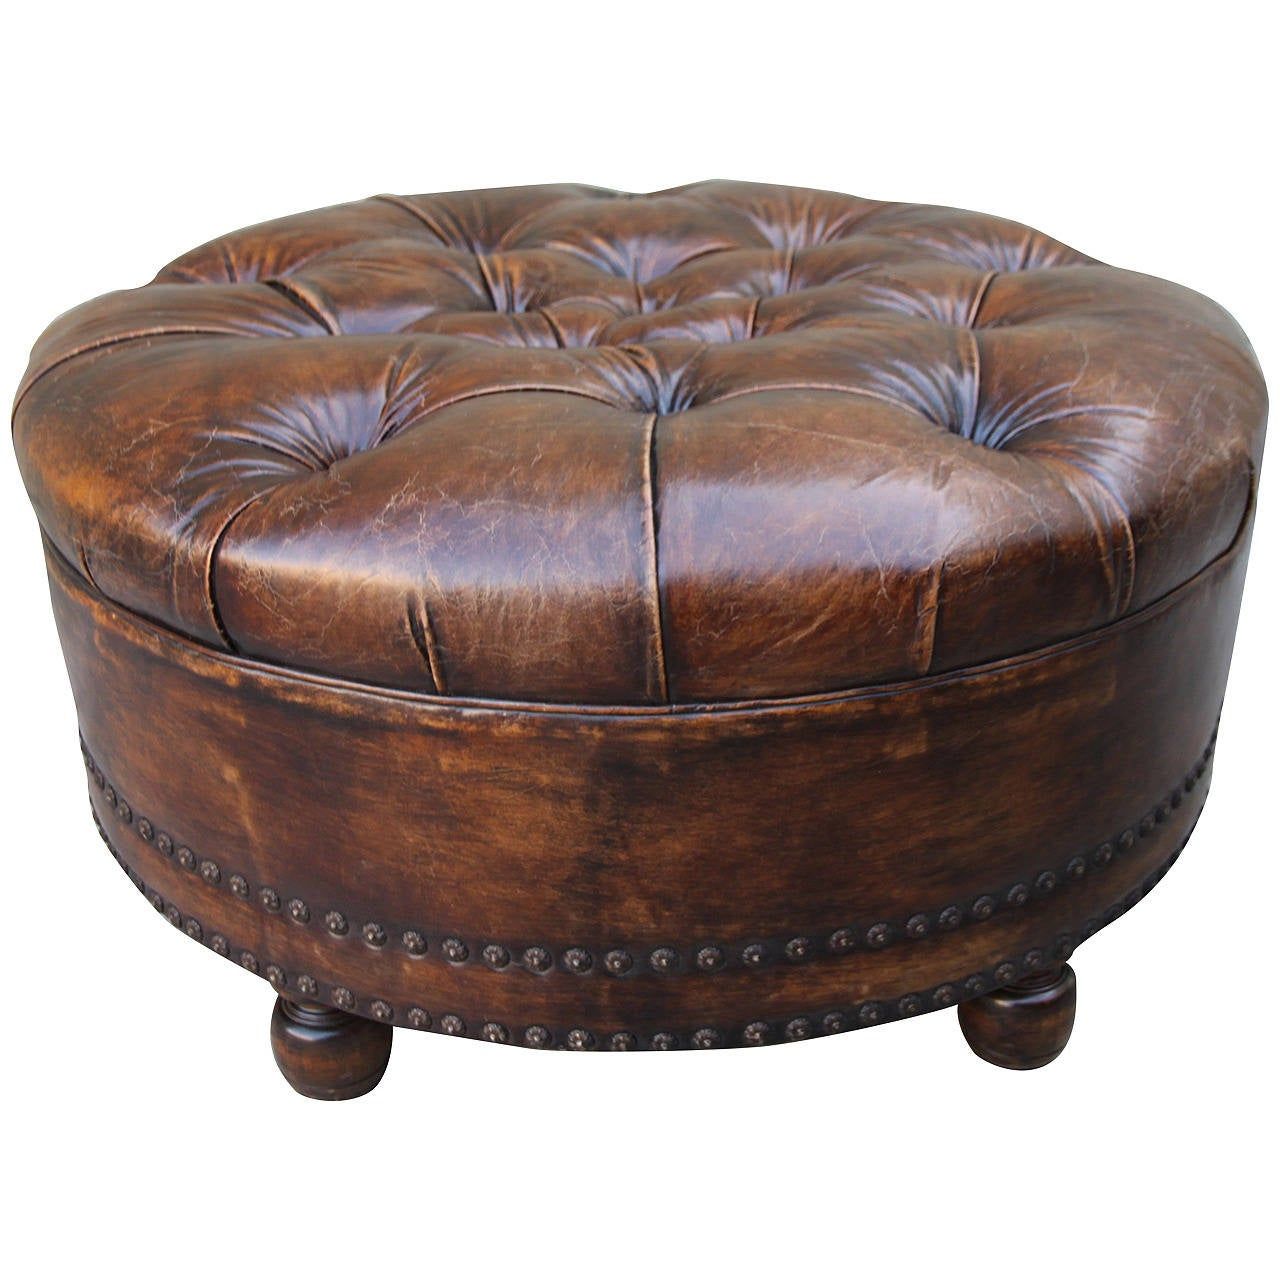 Leather Tufted Round Ottoman At 1stdibs Within Black Leather Ottomans (View 17 of 20)